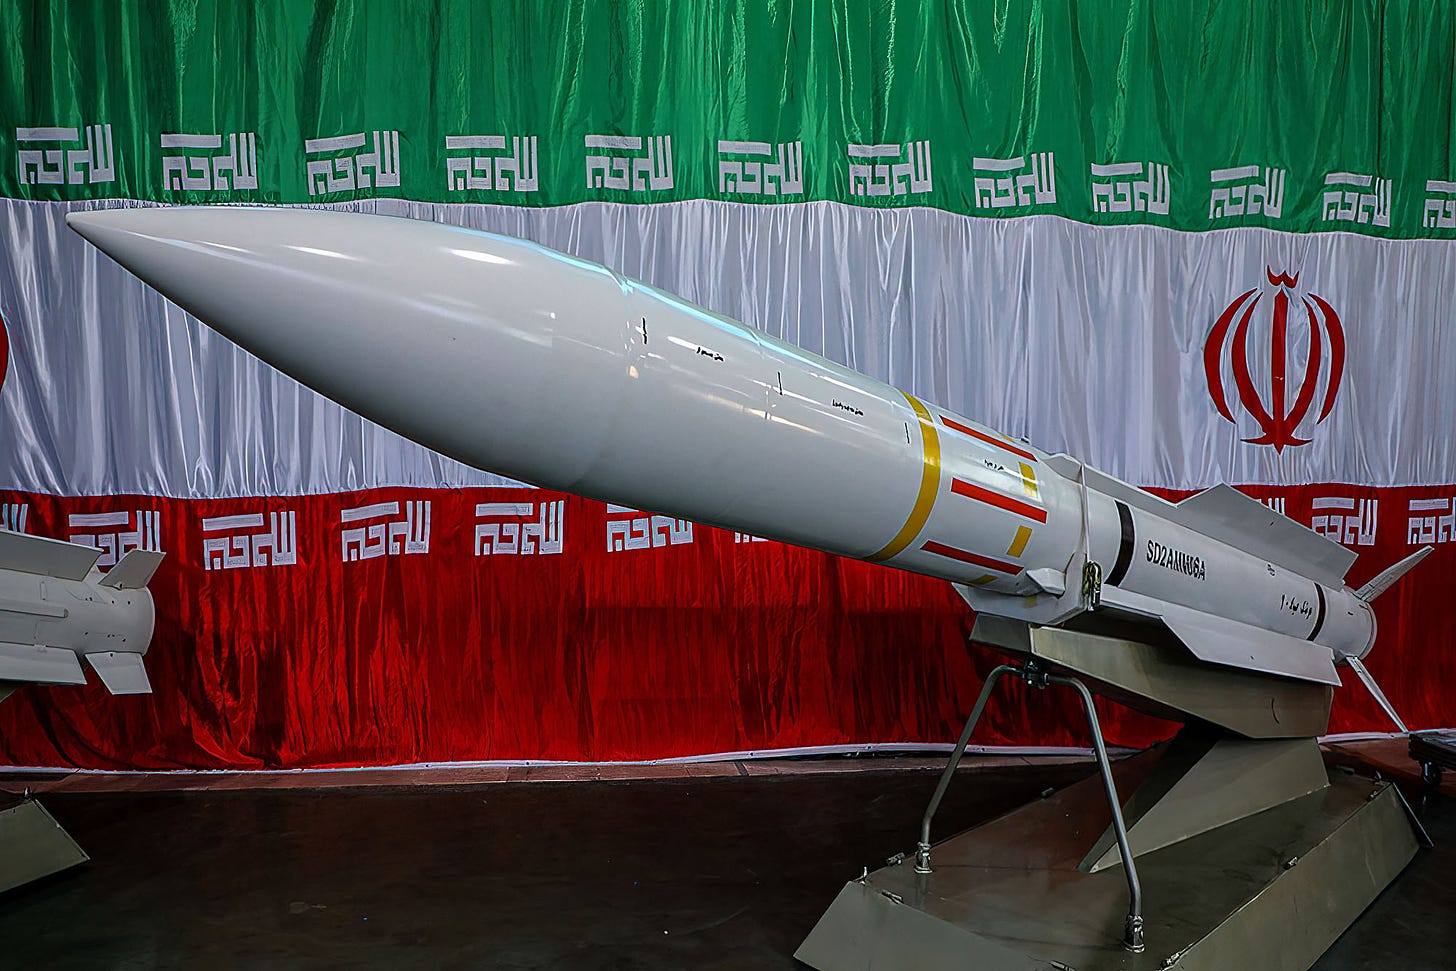 Iran claims it has developed a hypersonic ballistic missile